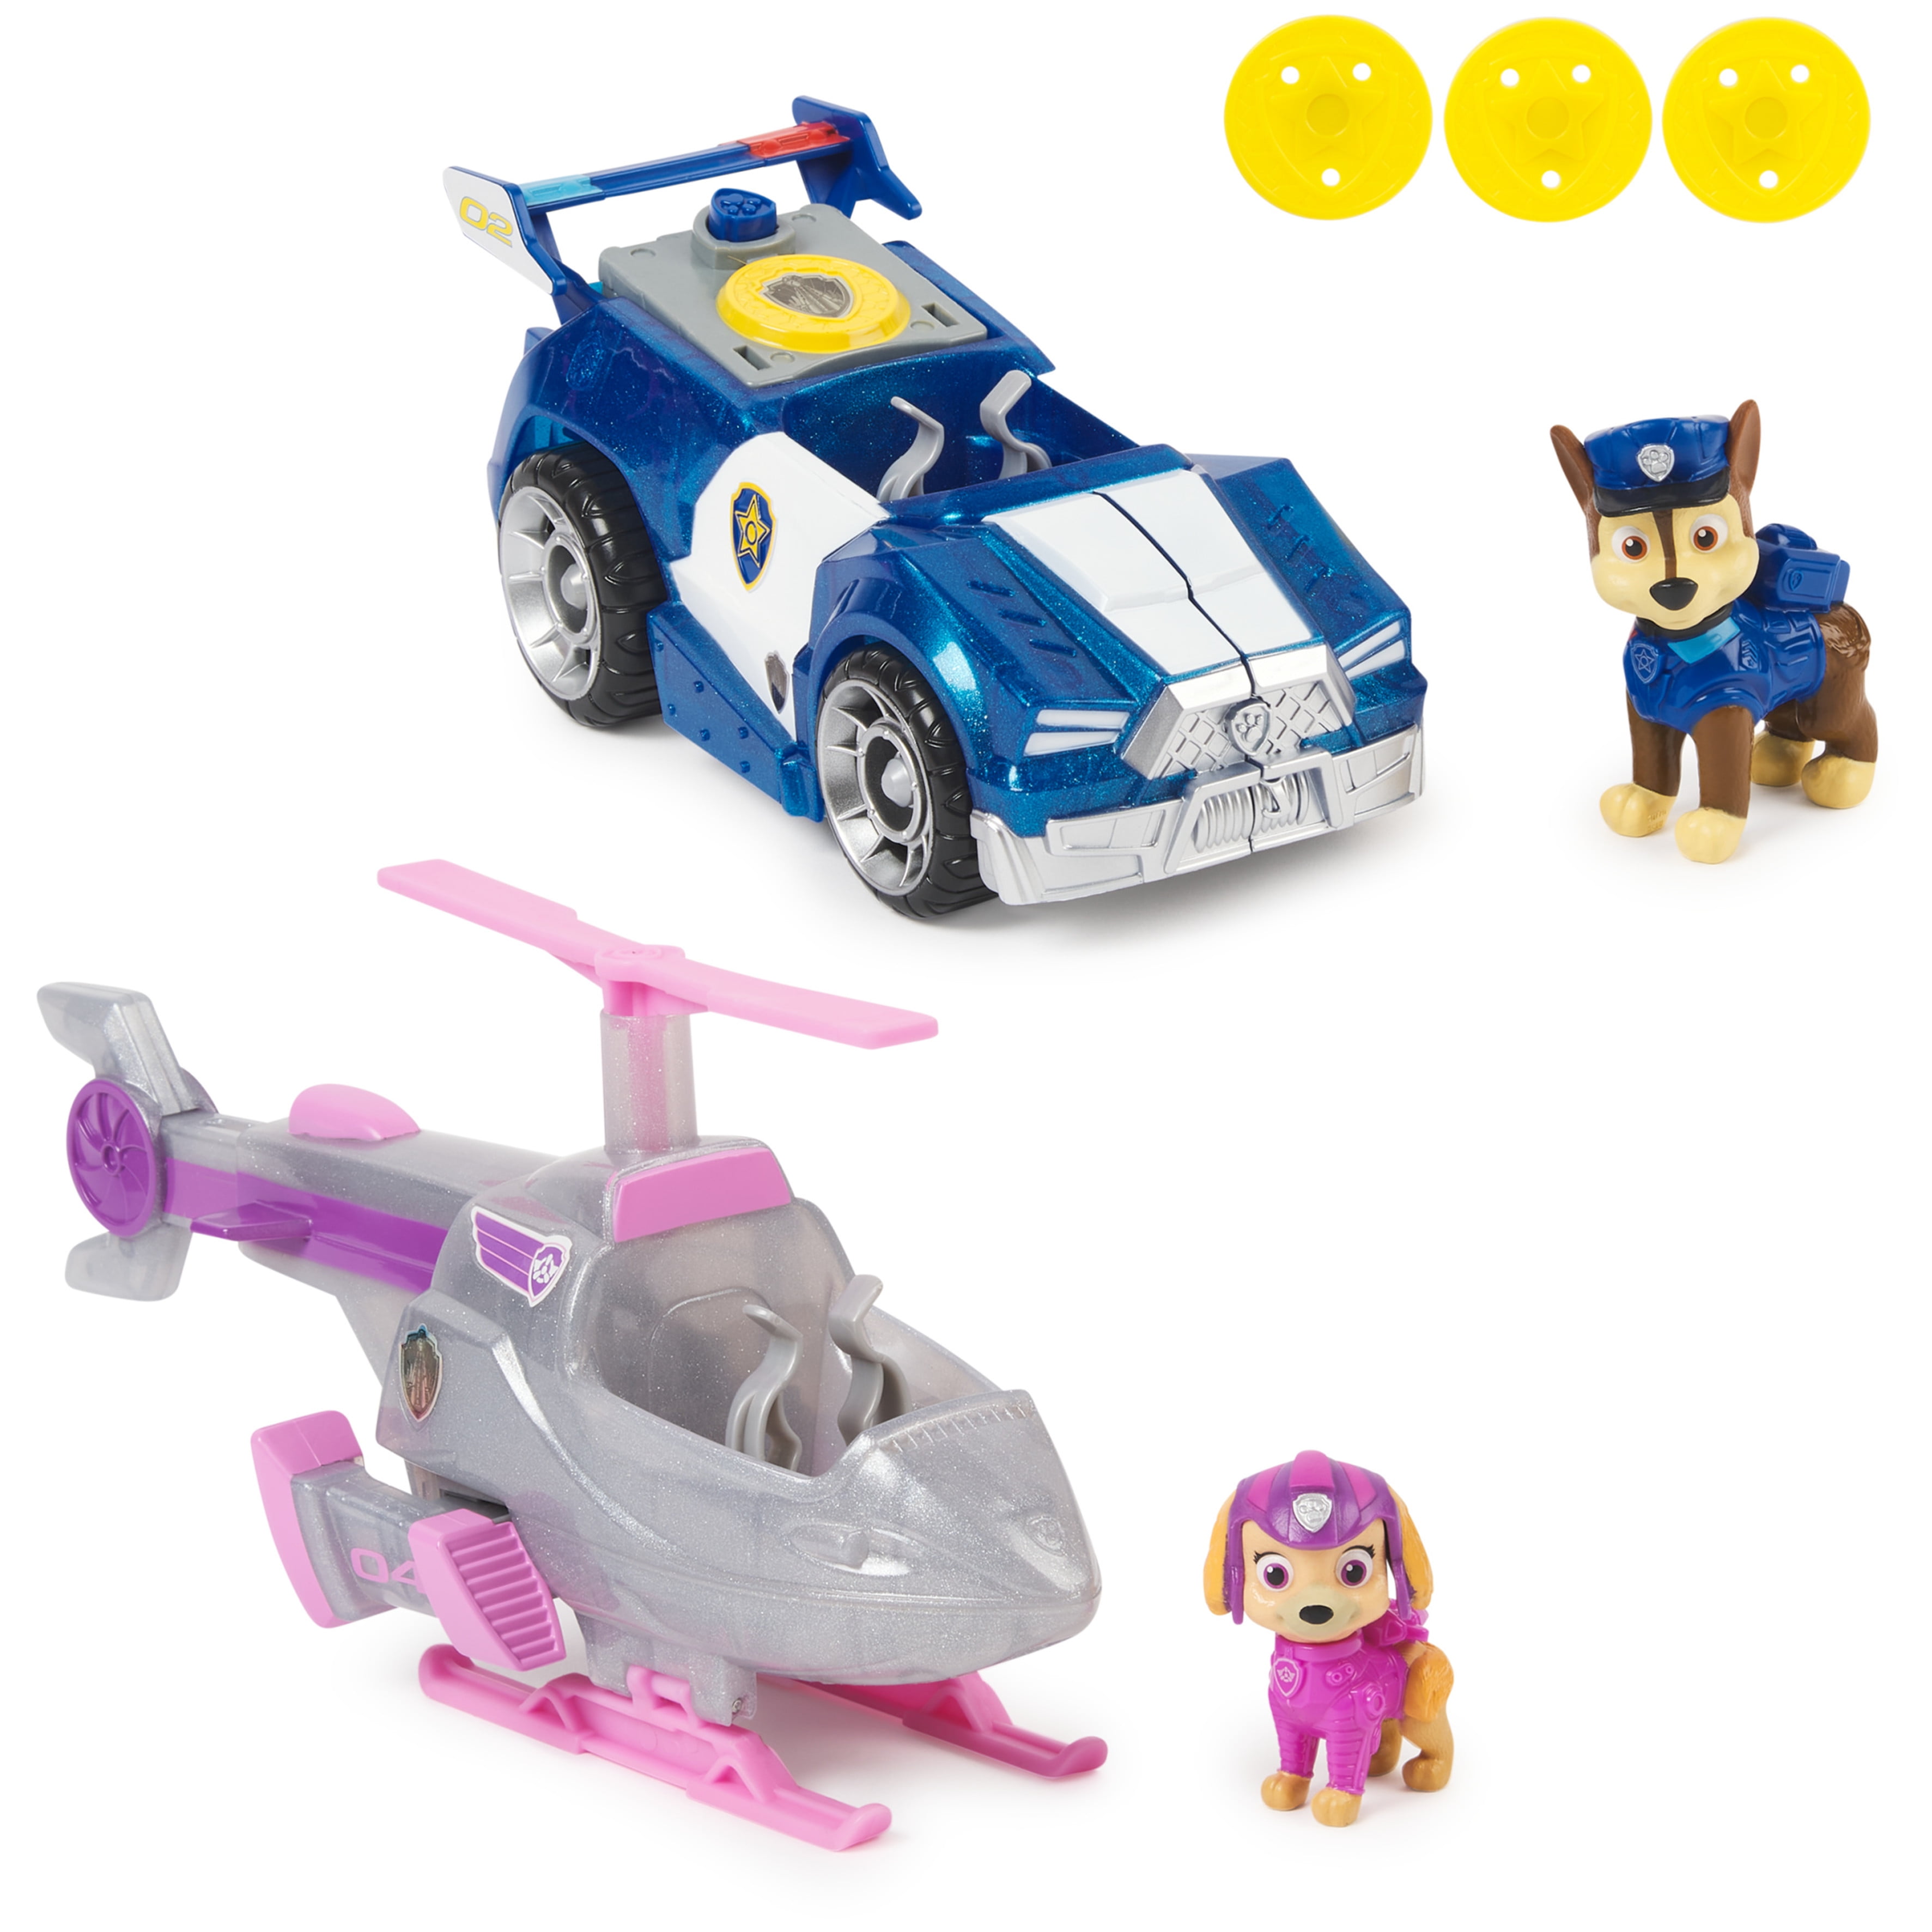 Paw Patrol Toys/Playsets - Figures/Vehicles/Playsets/Paw  Patroller/Chase/Skye